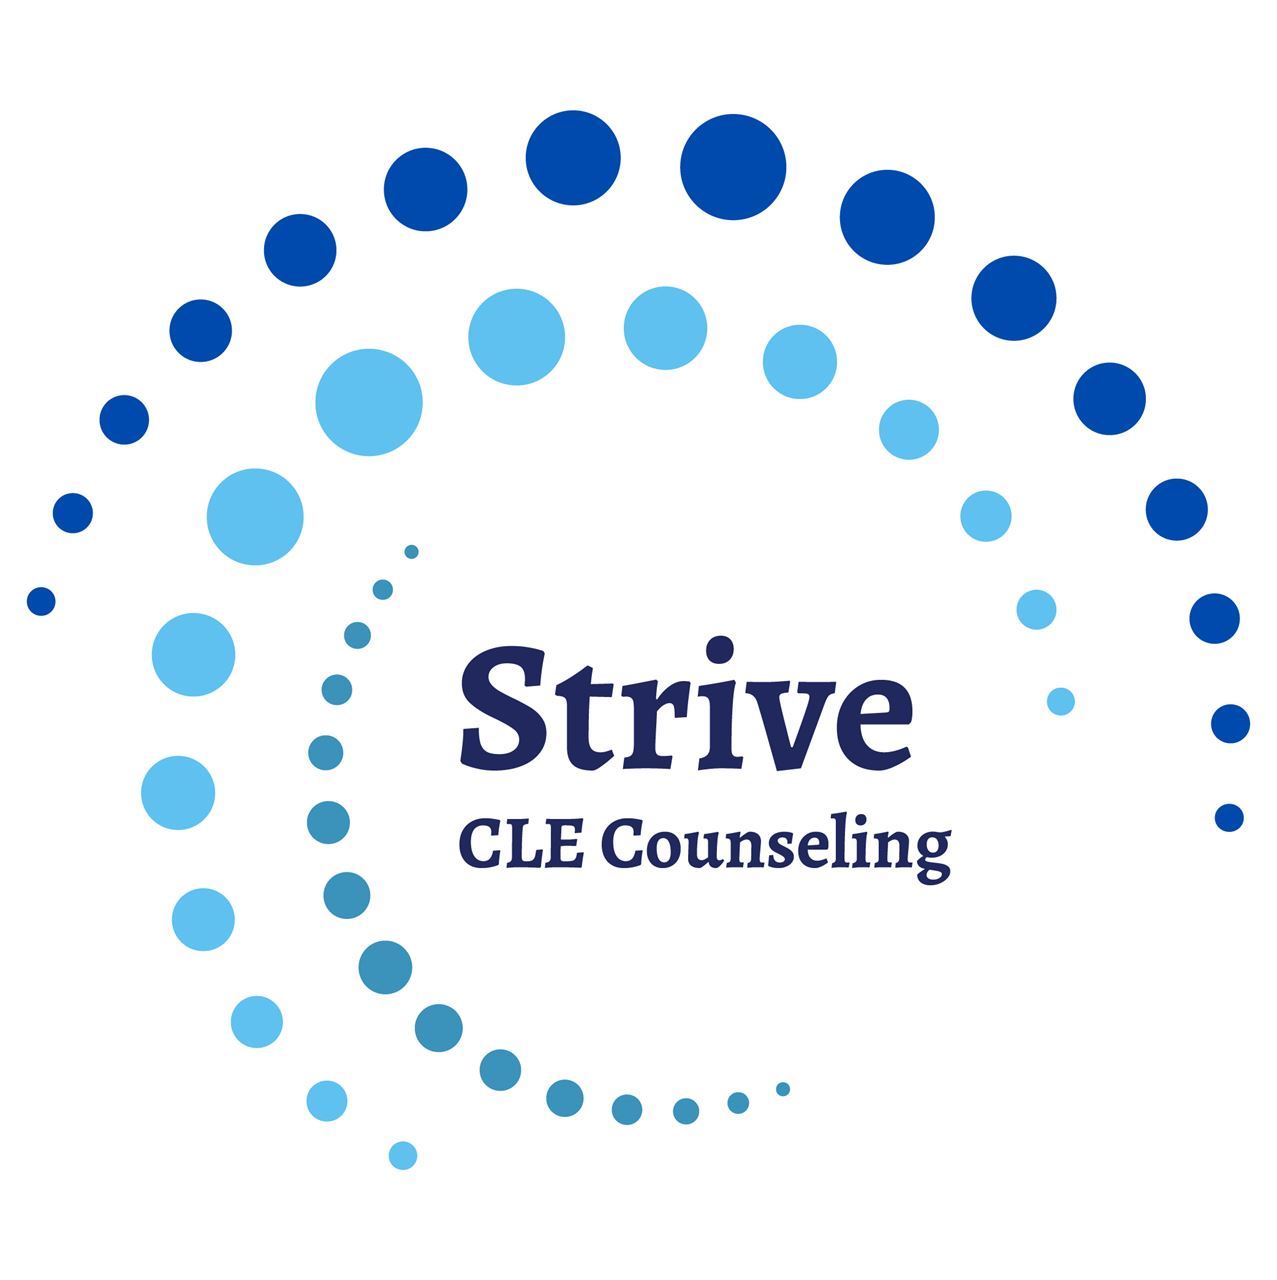 Click to visit the Strive CLE Counselign website